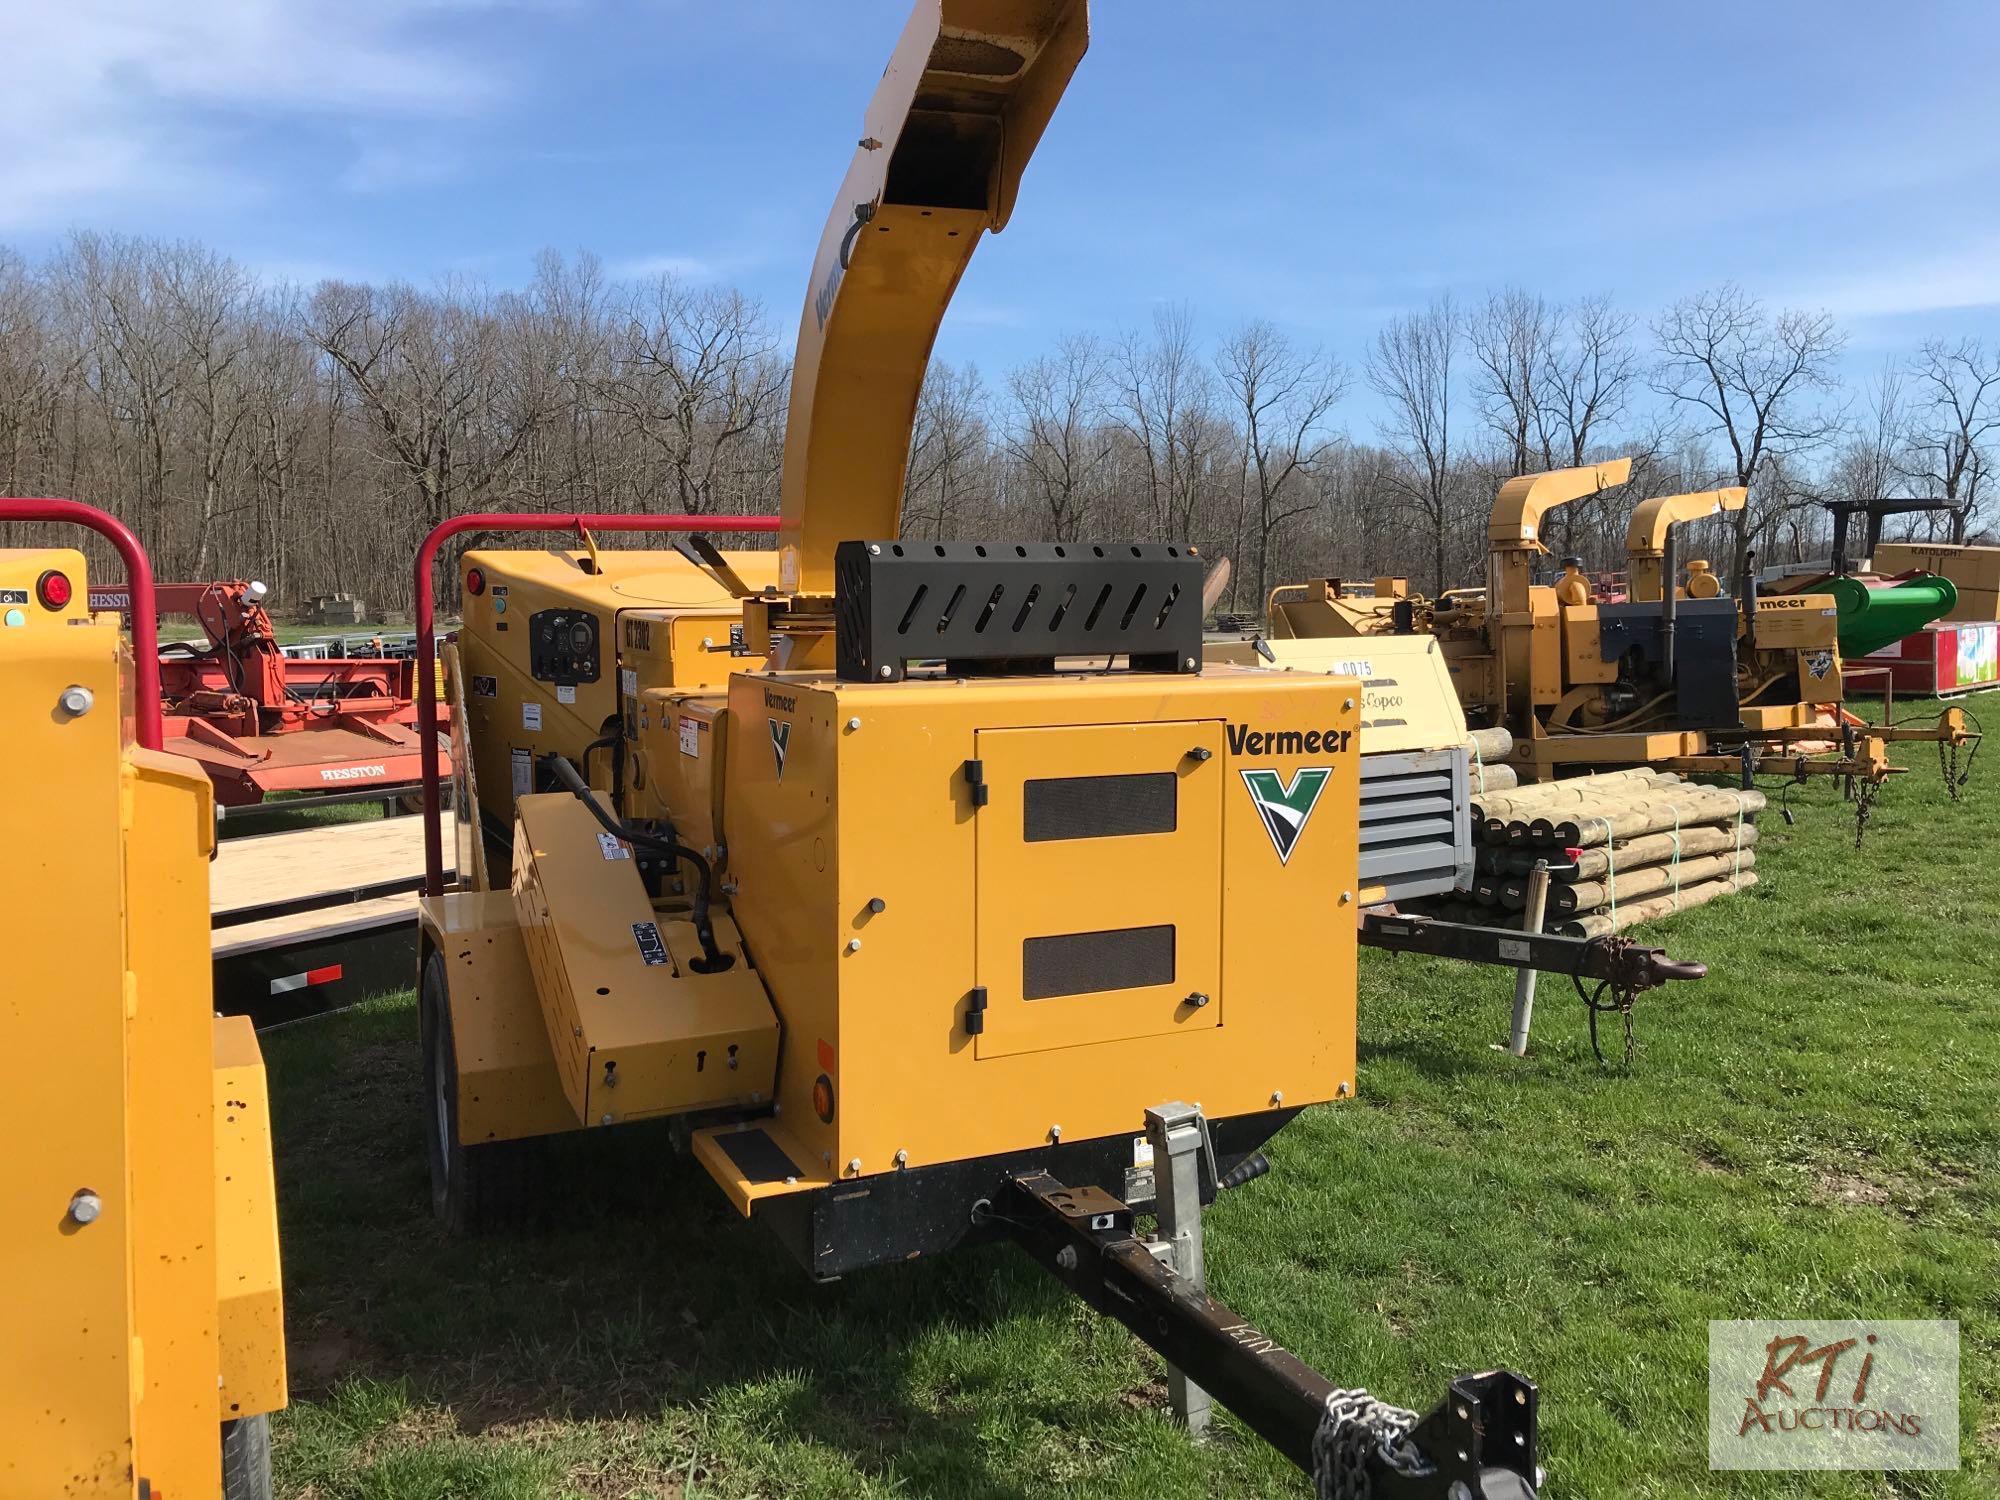 Vermeer BC1000 XL power feed wood chipper, gas engine, 750 hrs